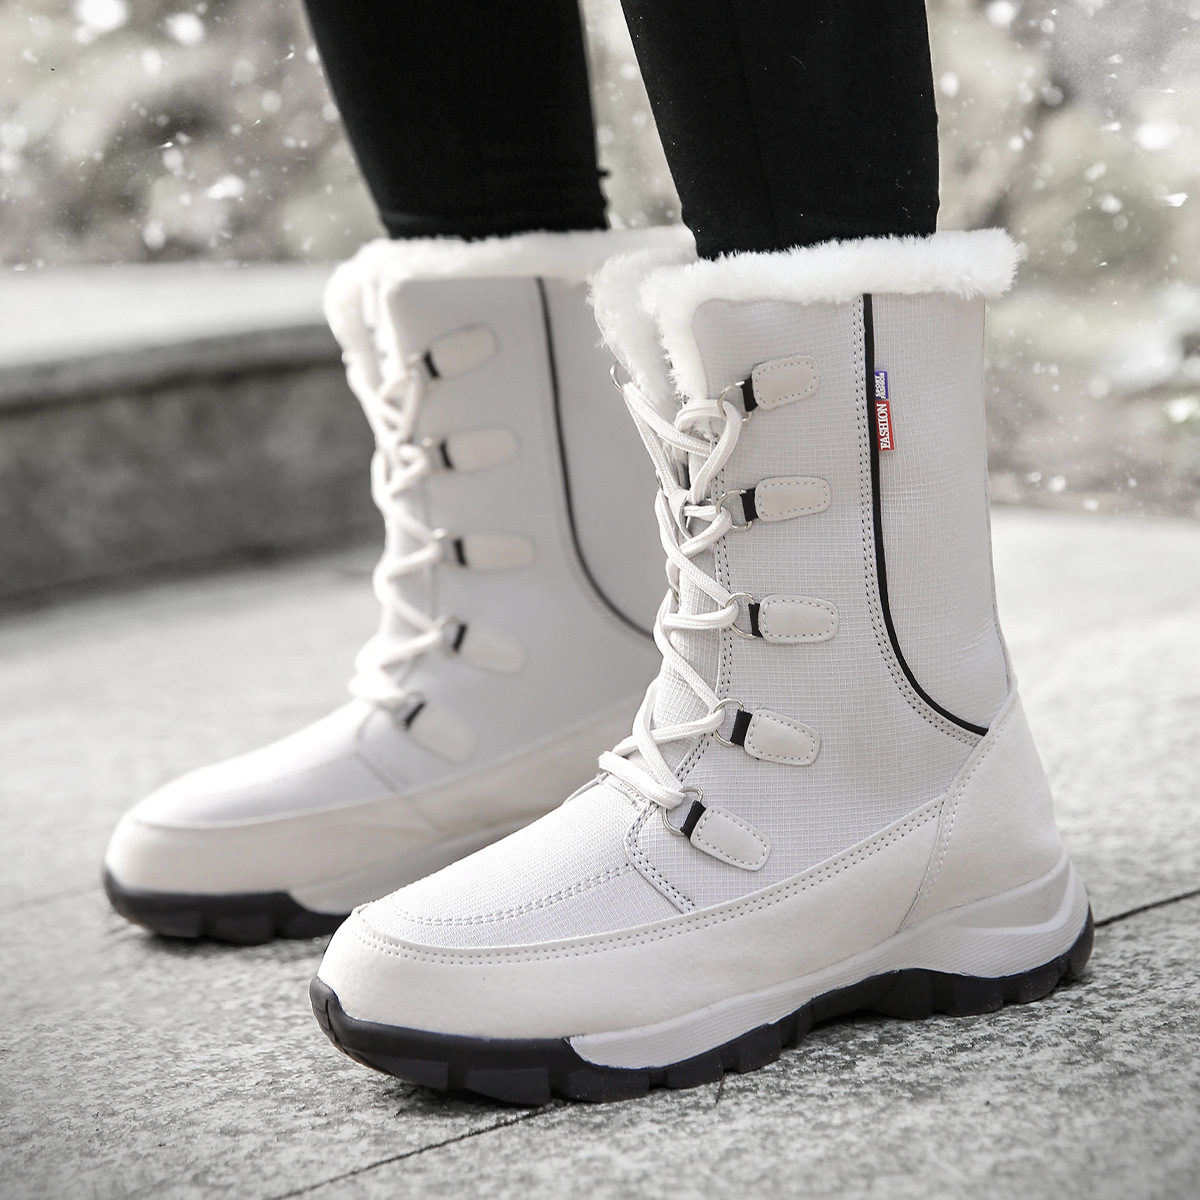 Cross border Large Gobon Snow boots fashion thickening Plush keep warm non-slip The thickness of the bottom outdoors leisure time Cotton boots In cylinder